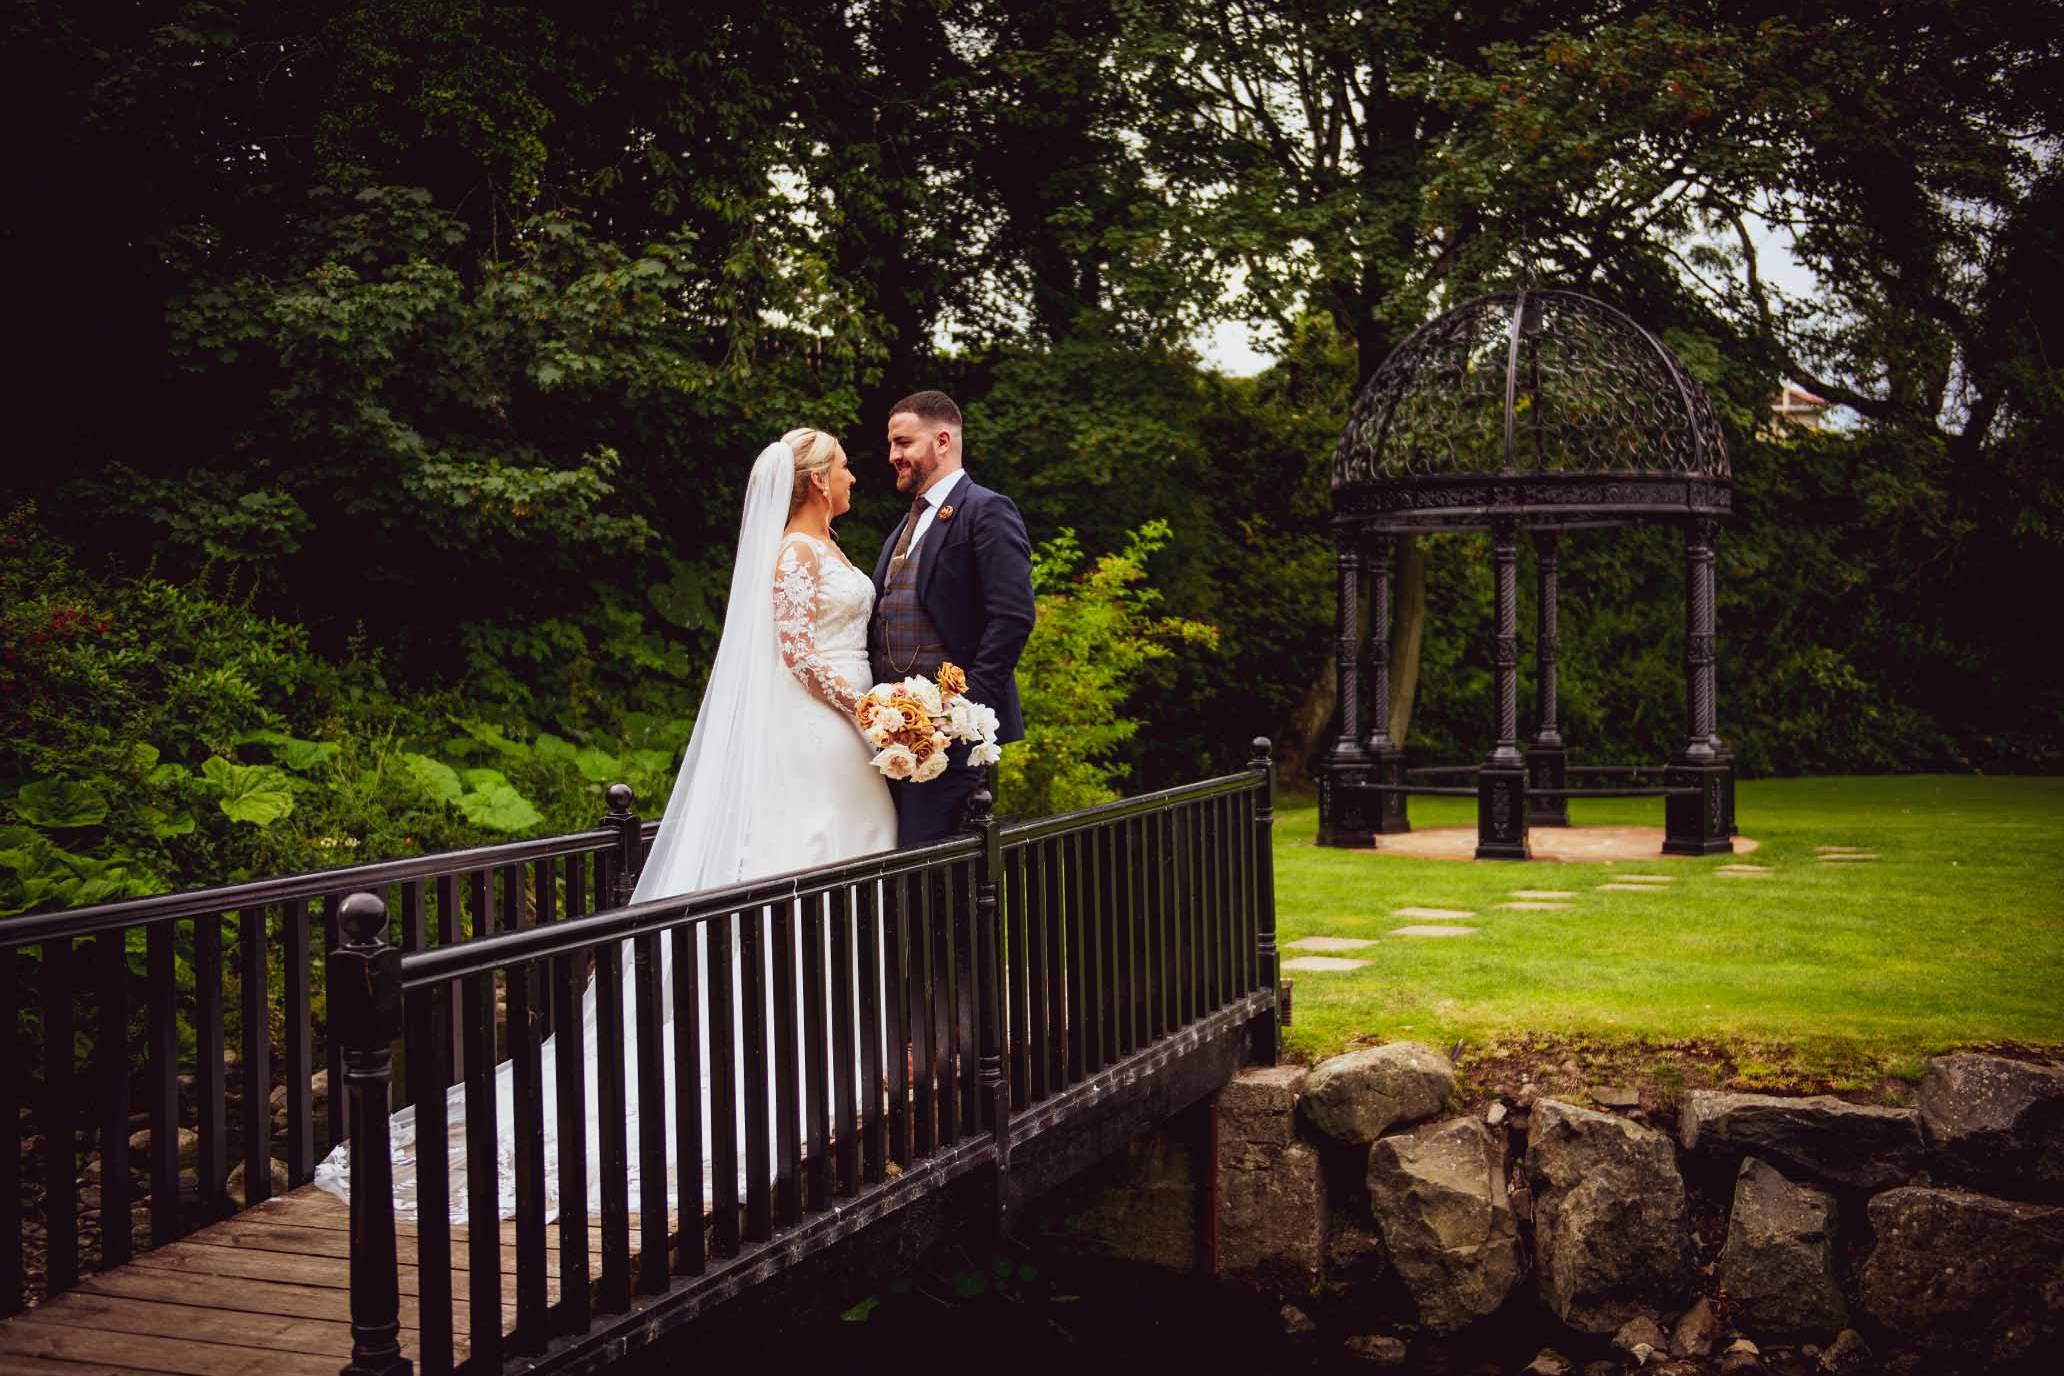 Melissa & Aidan - standing on a bridge looking lovingly at each other at Ballygally Castle